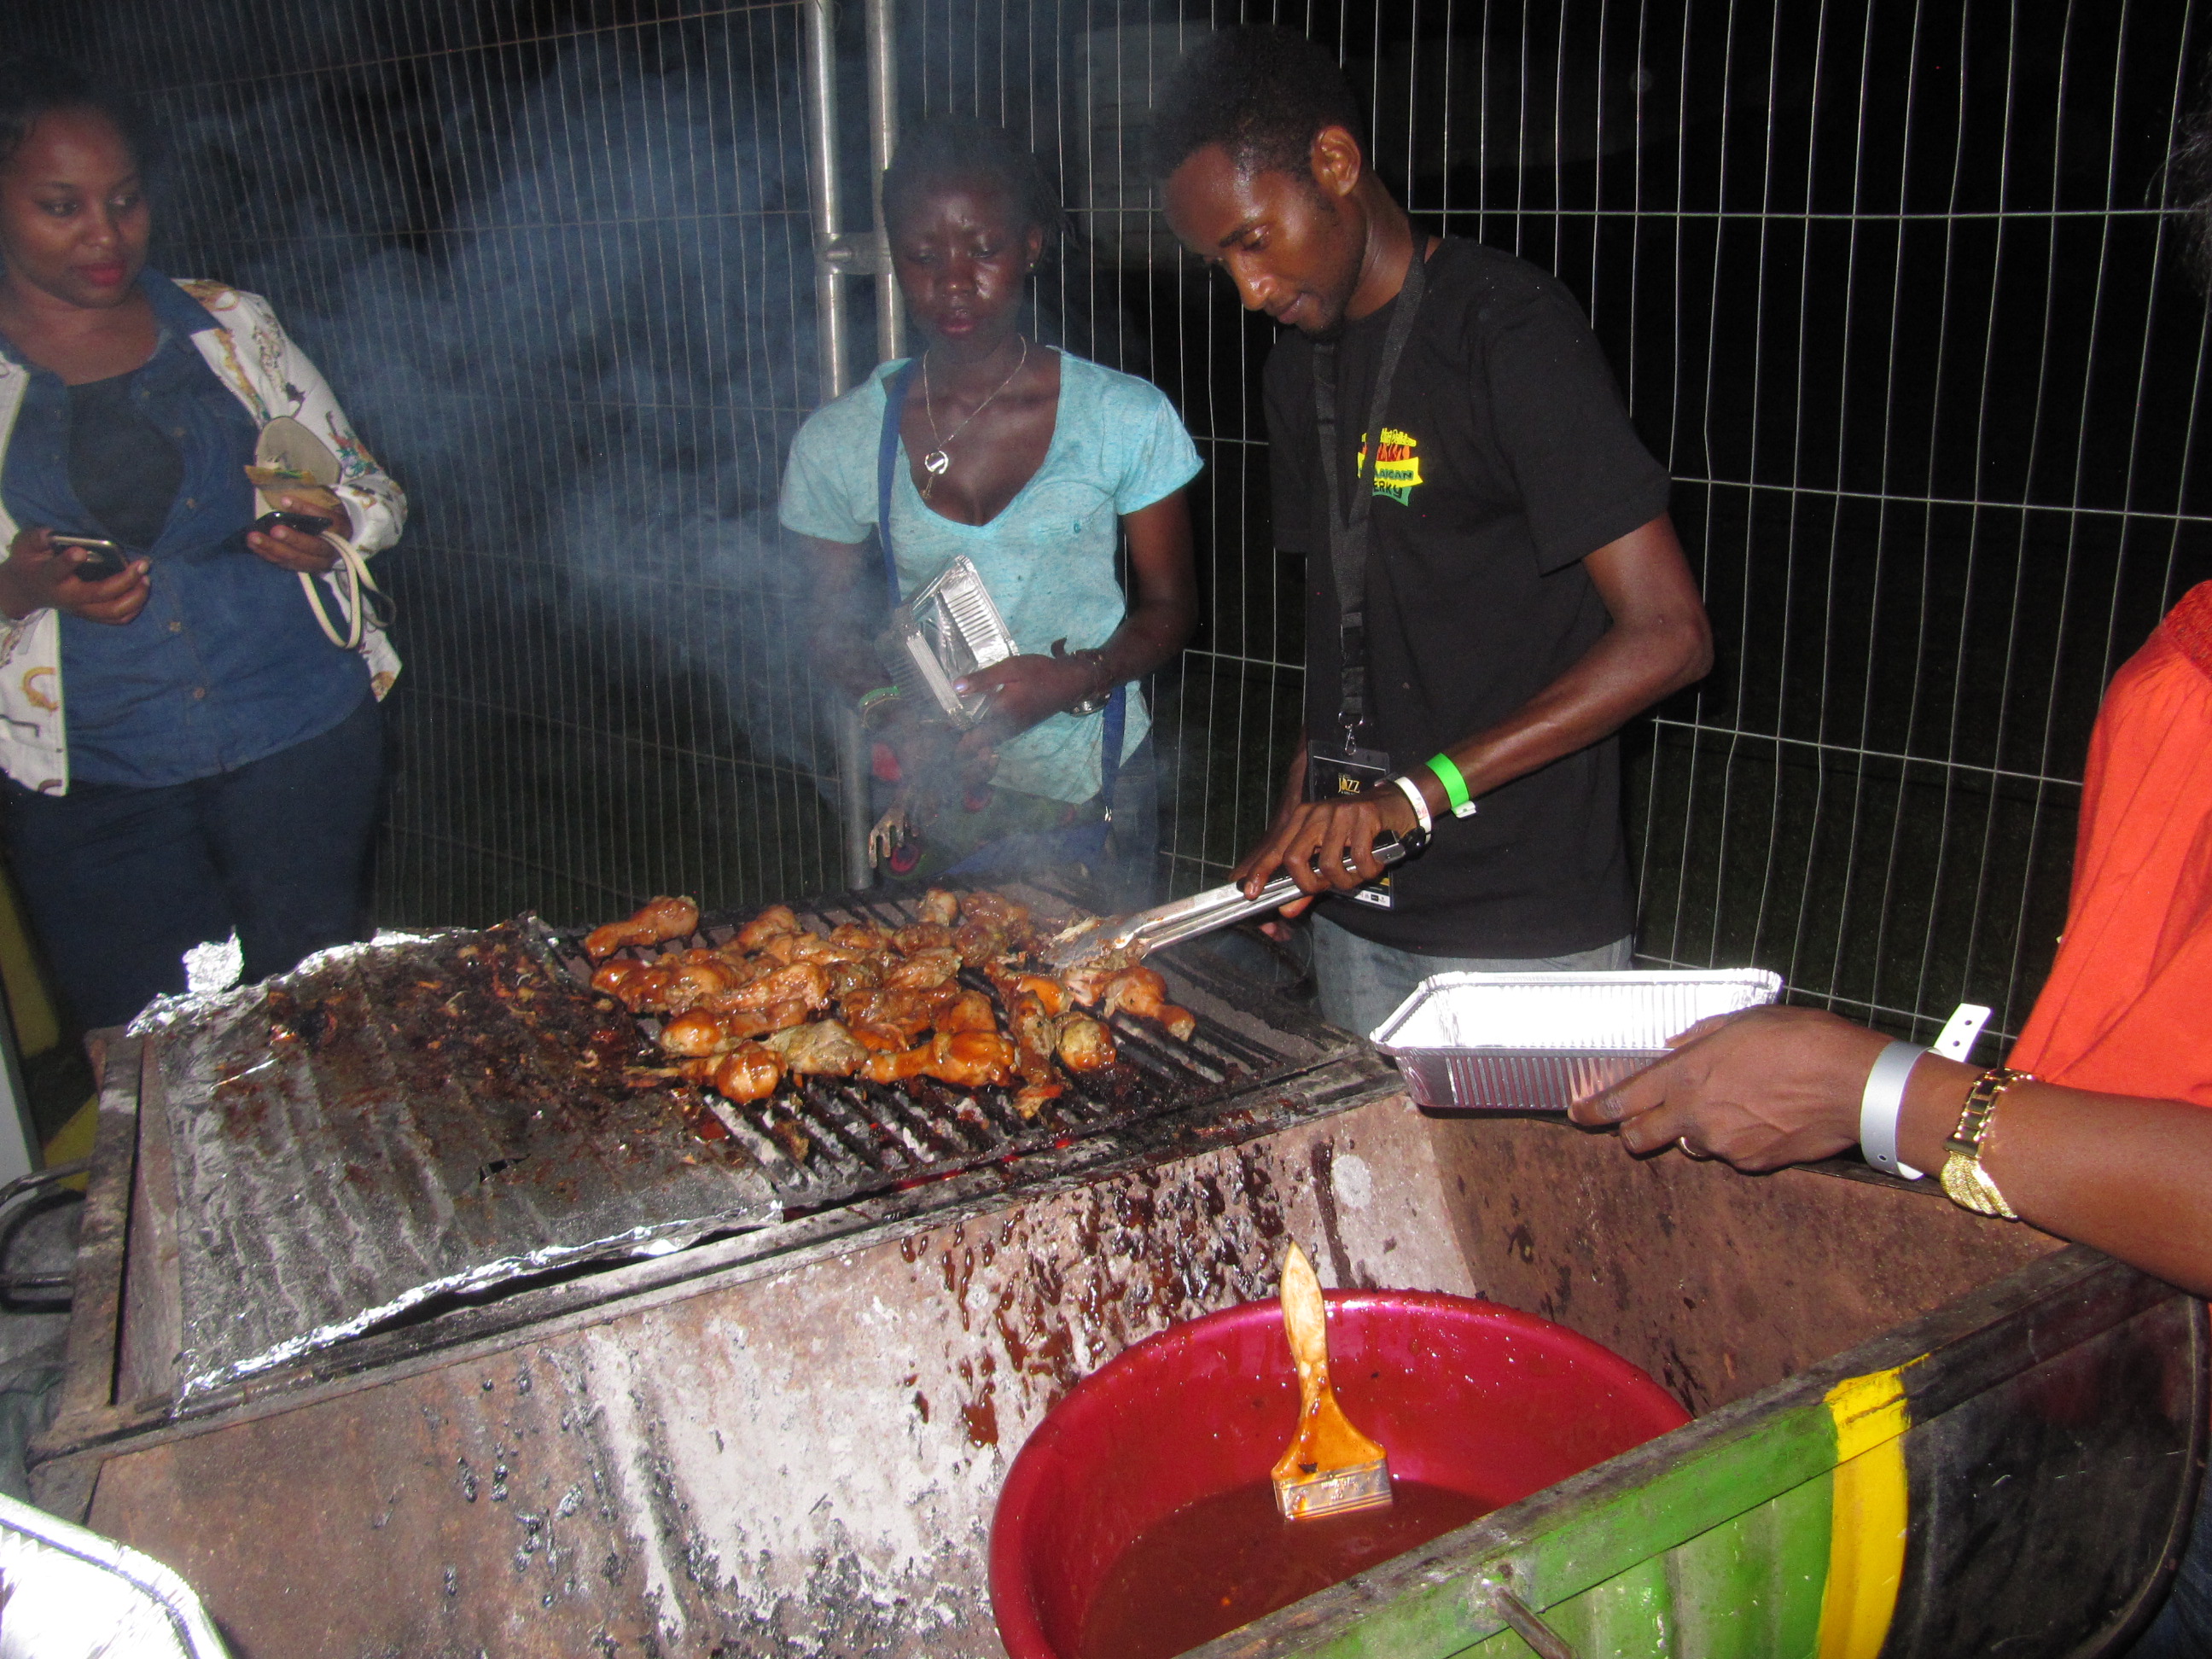 Ugandan Food is yummy too, some chicken choma on the grills as hungry fans await their turn